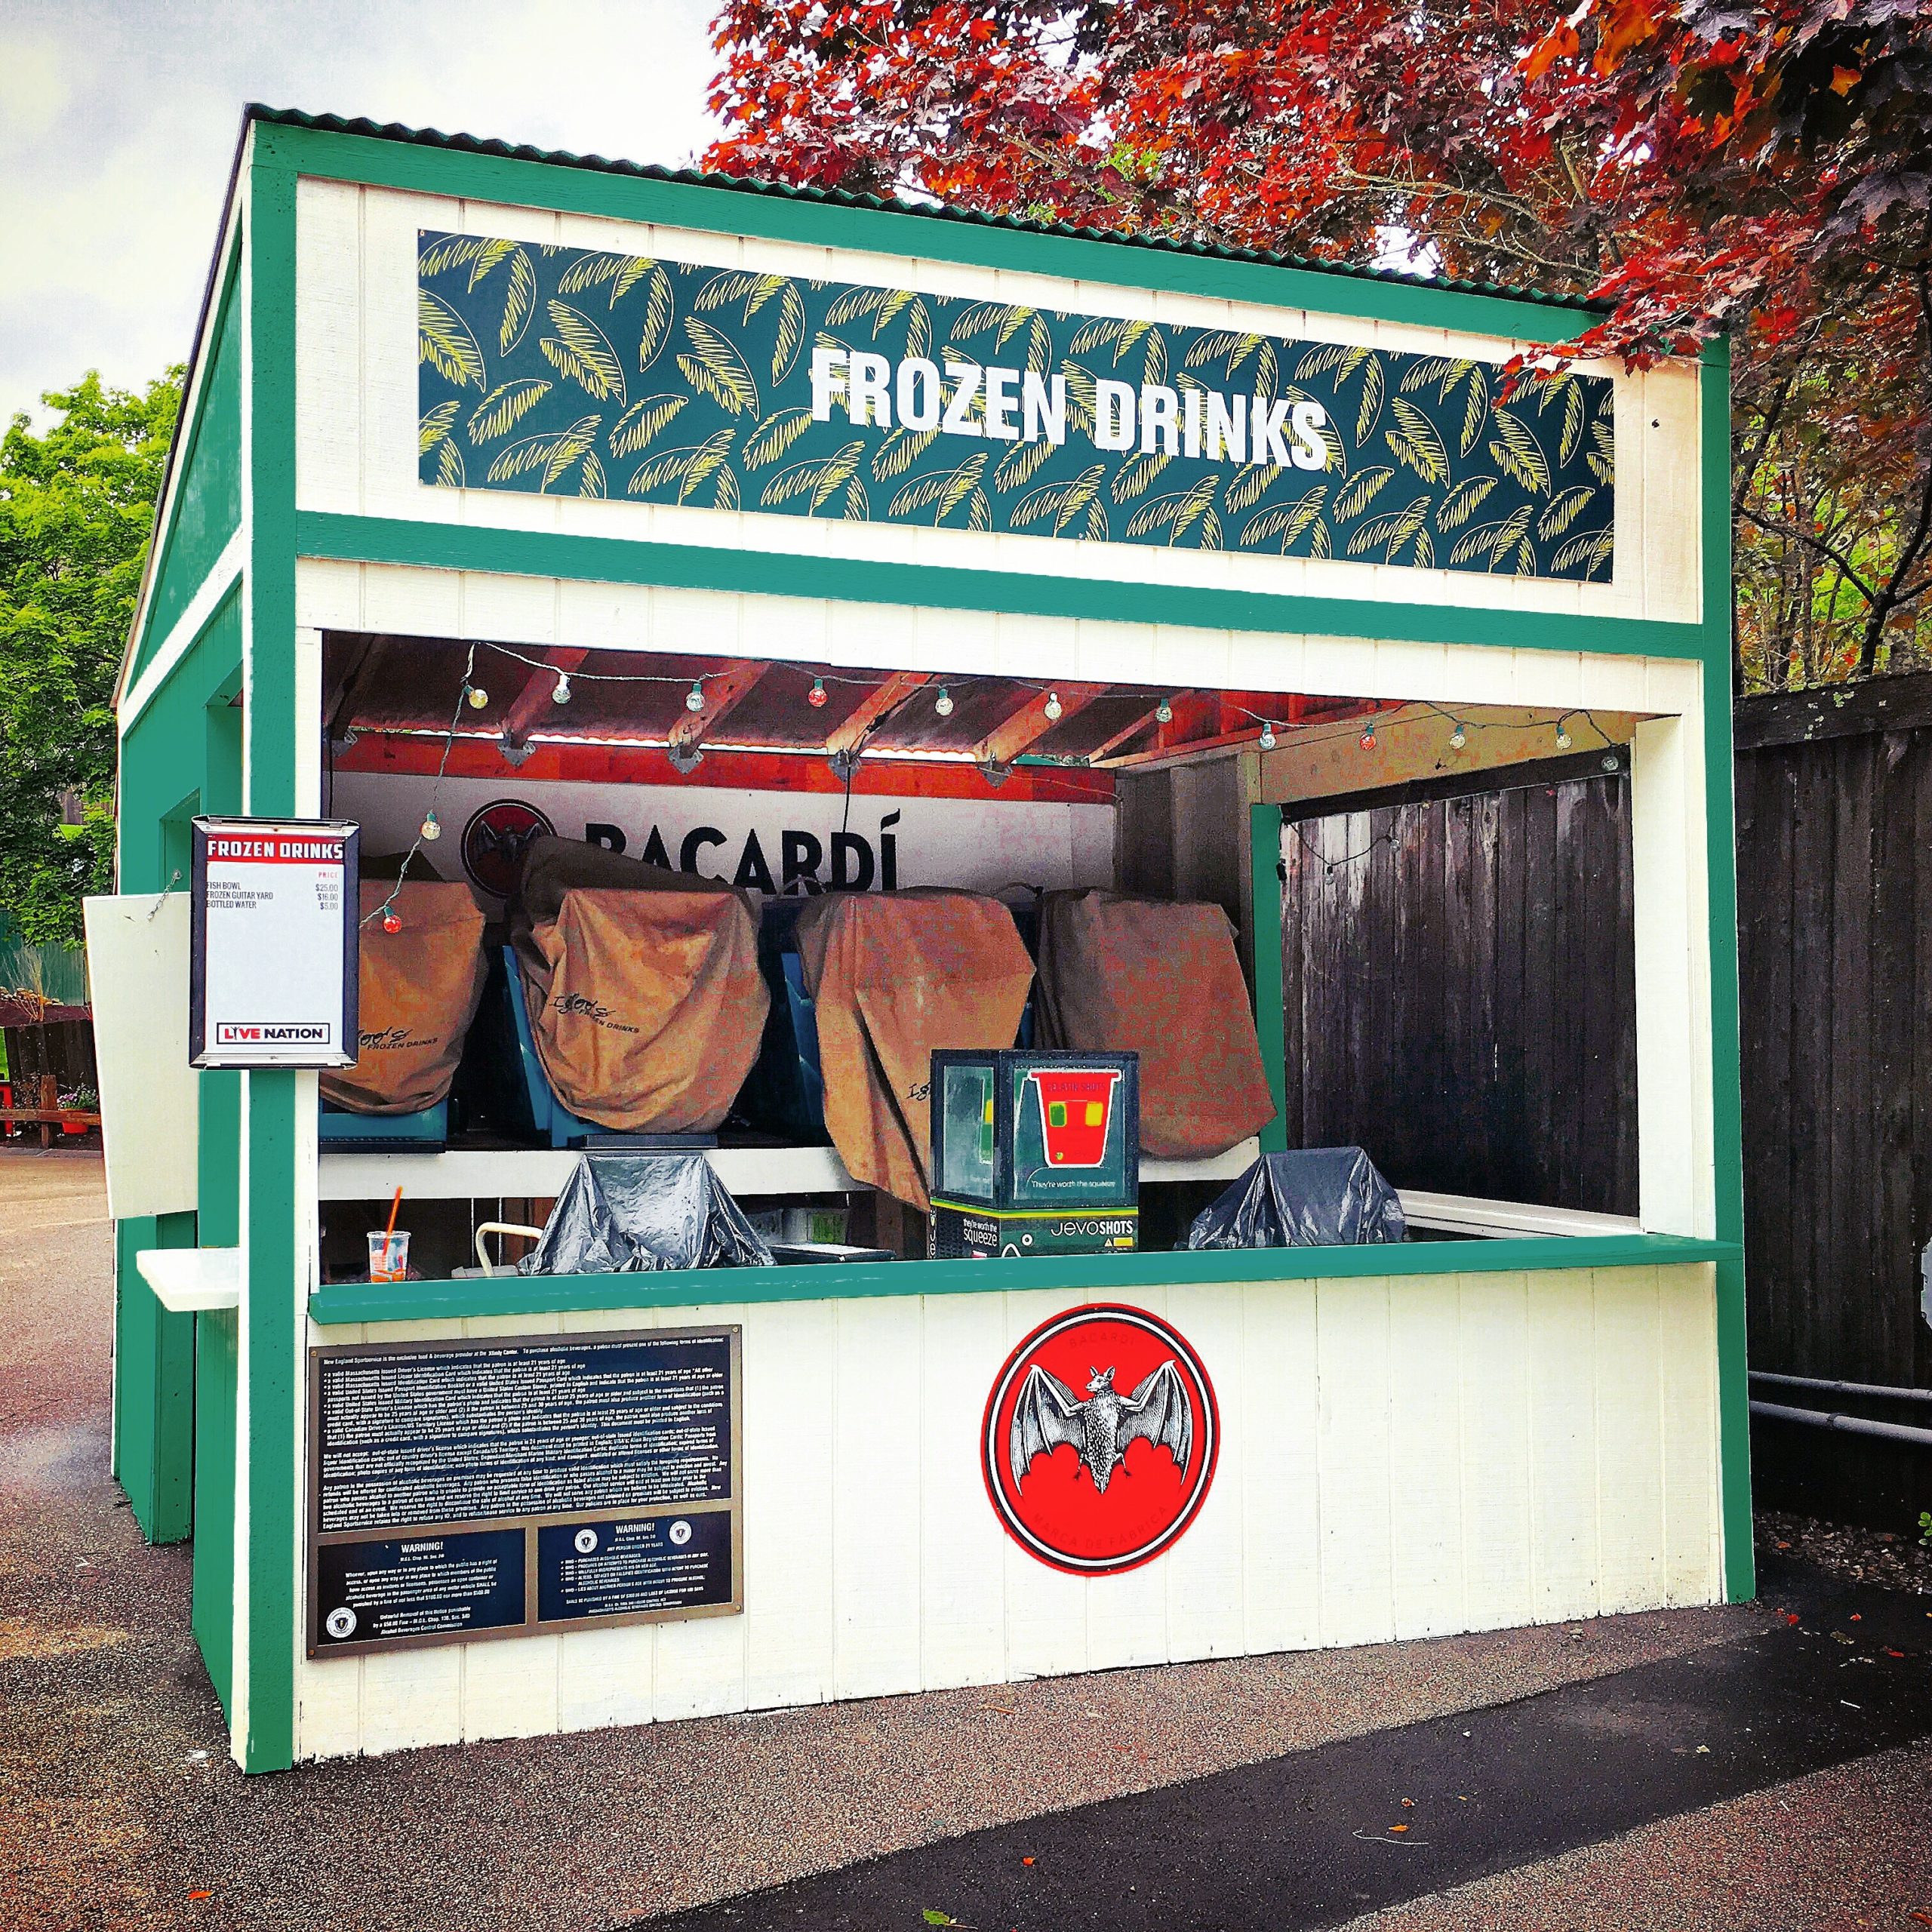 Bacardi frozen drinks event stand 